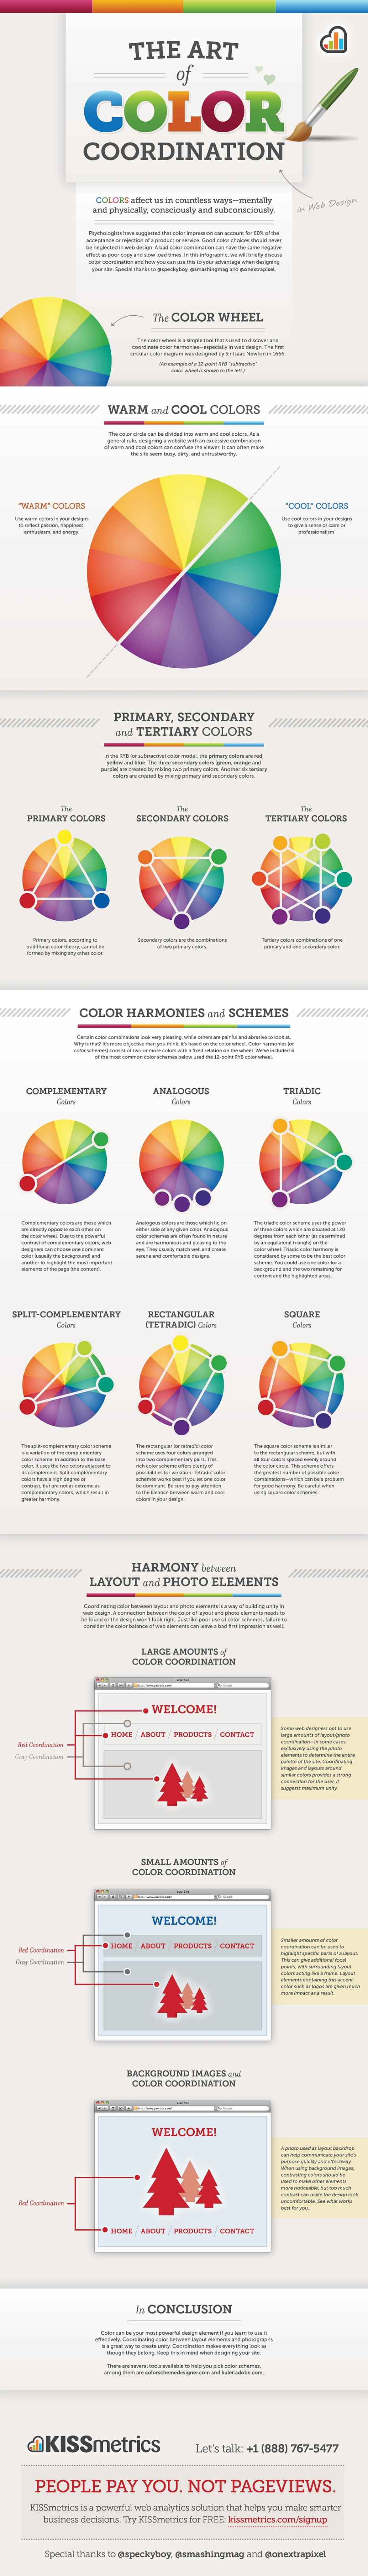 TheUltraLinx: http://theultralinx.com/2012/06/art-colour-coordination-infographic/